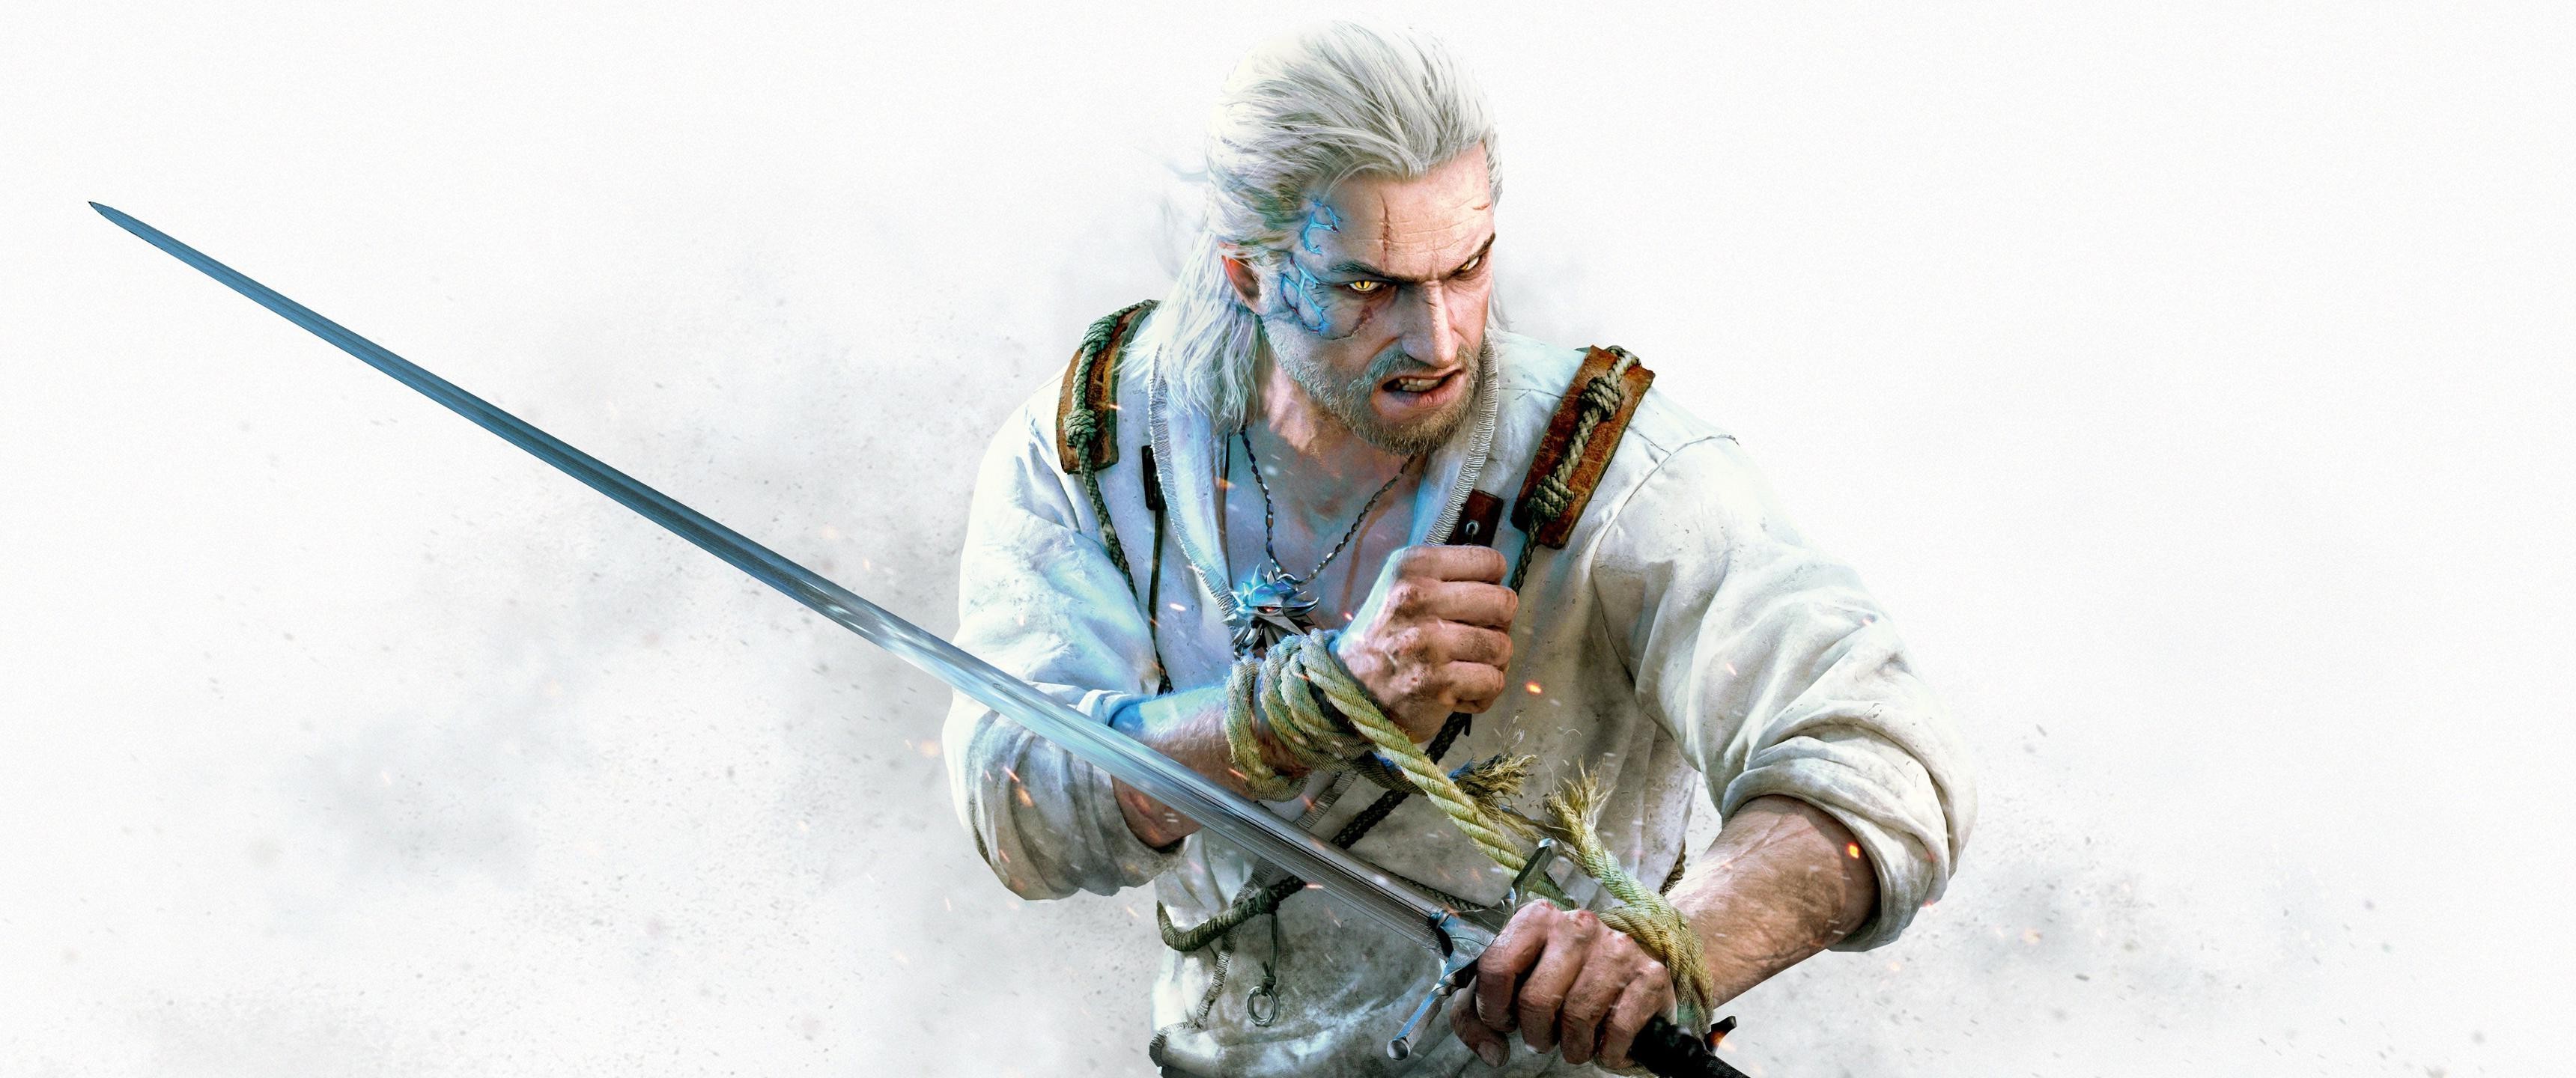 Geralt Of Rivia, The Witcher, The Witcher 3: Wild Hunt Wallpaper